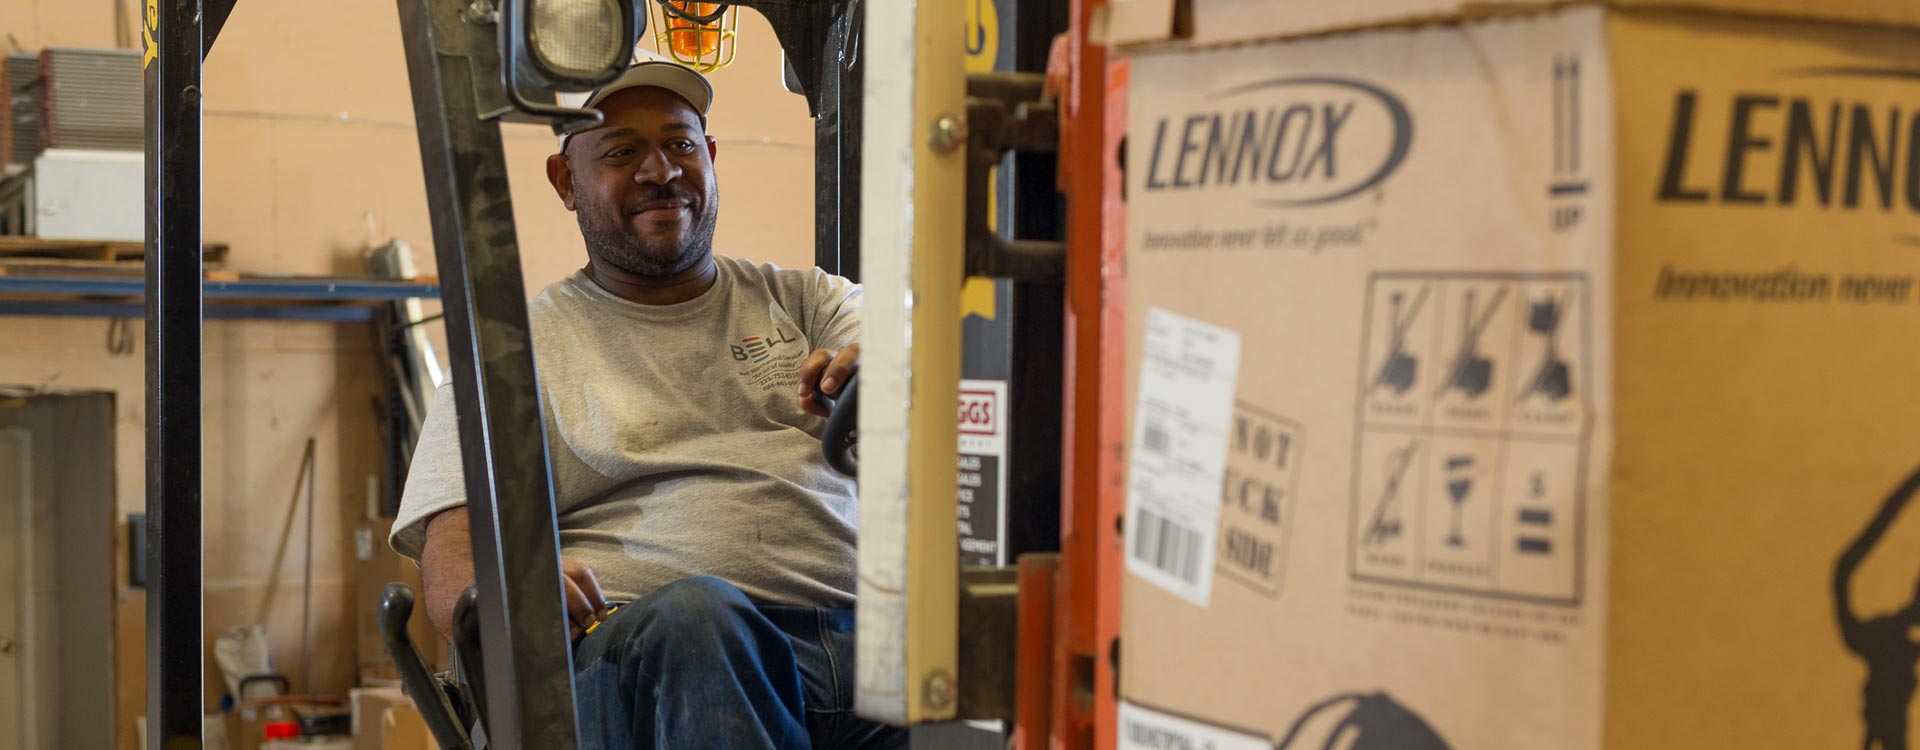 Moving Lennox in Bell facility